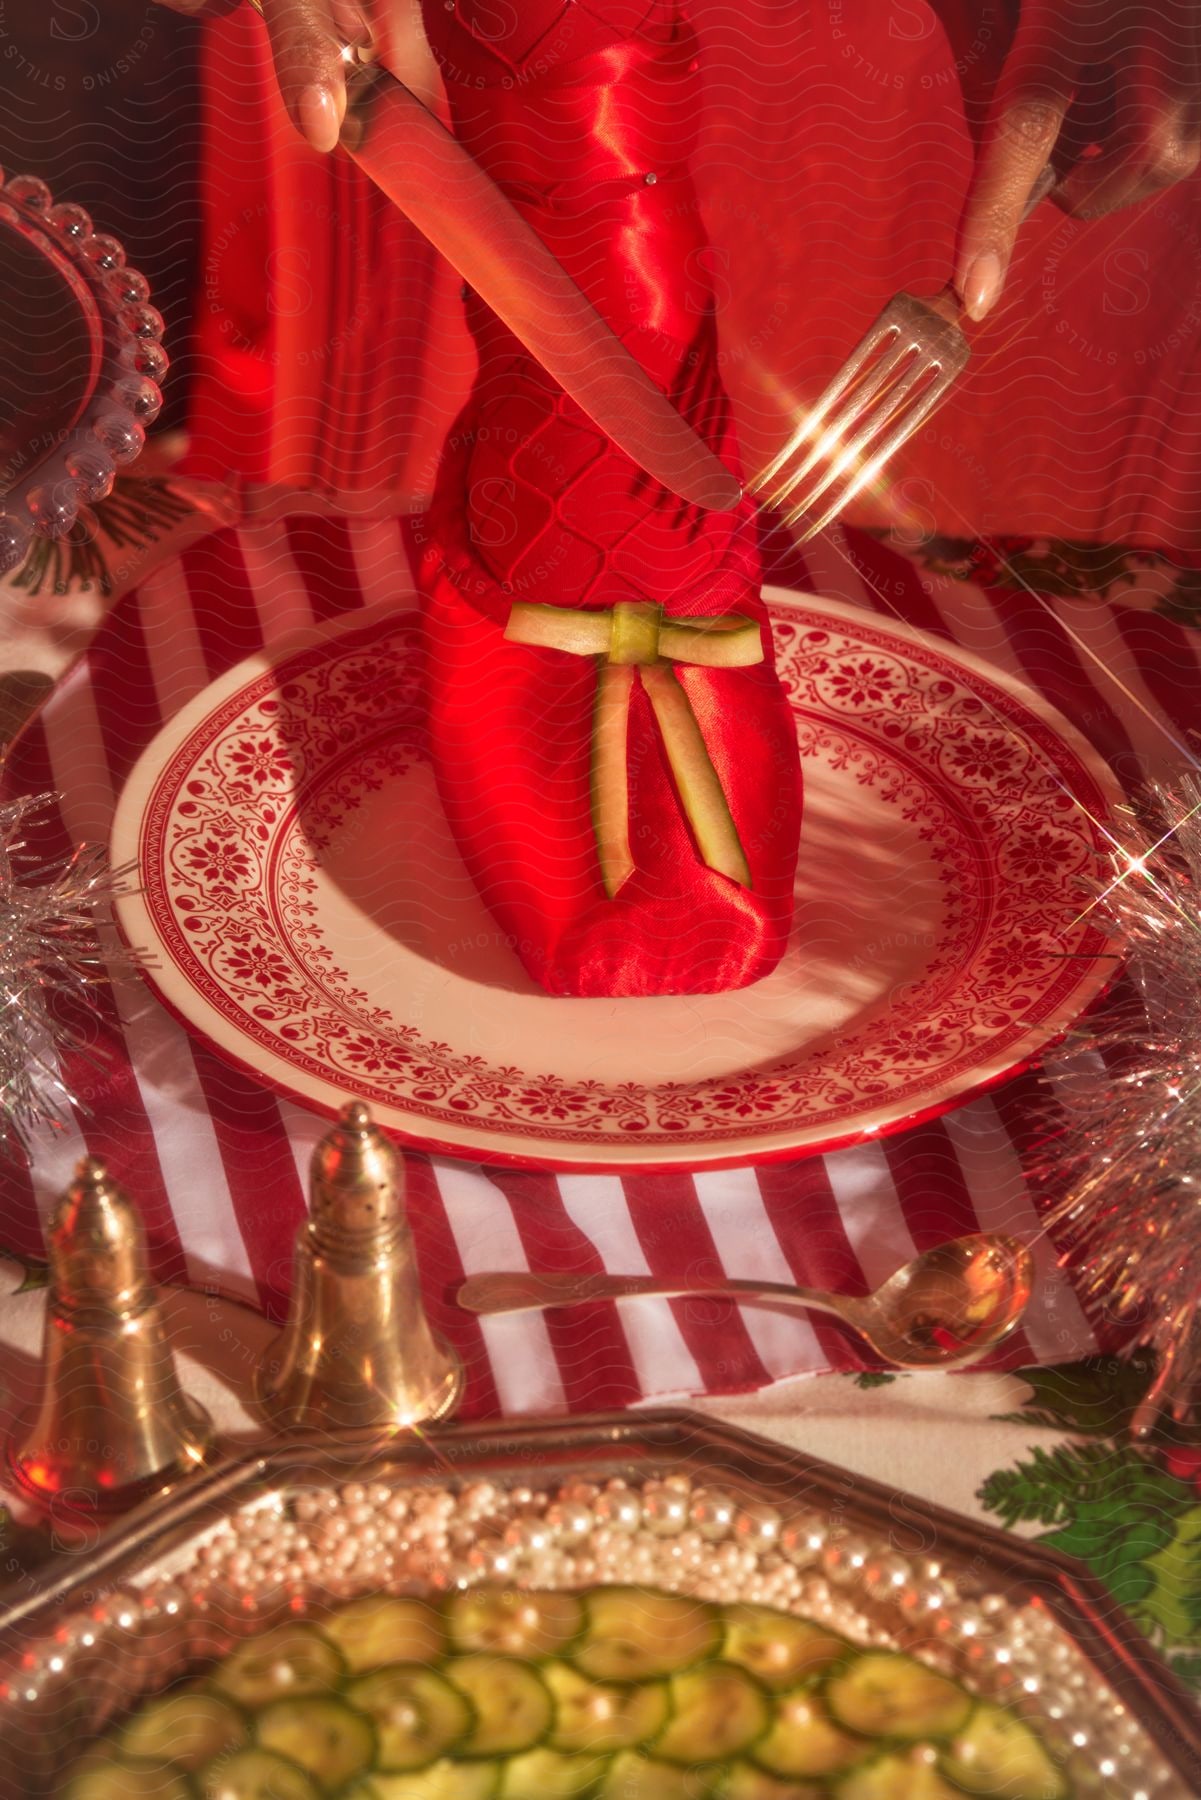 Stock photo of a whimsically decorated holiday table setting featuring a red napkin folded into a dress design on a plate.